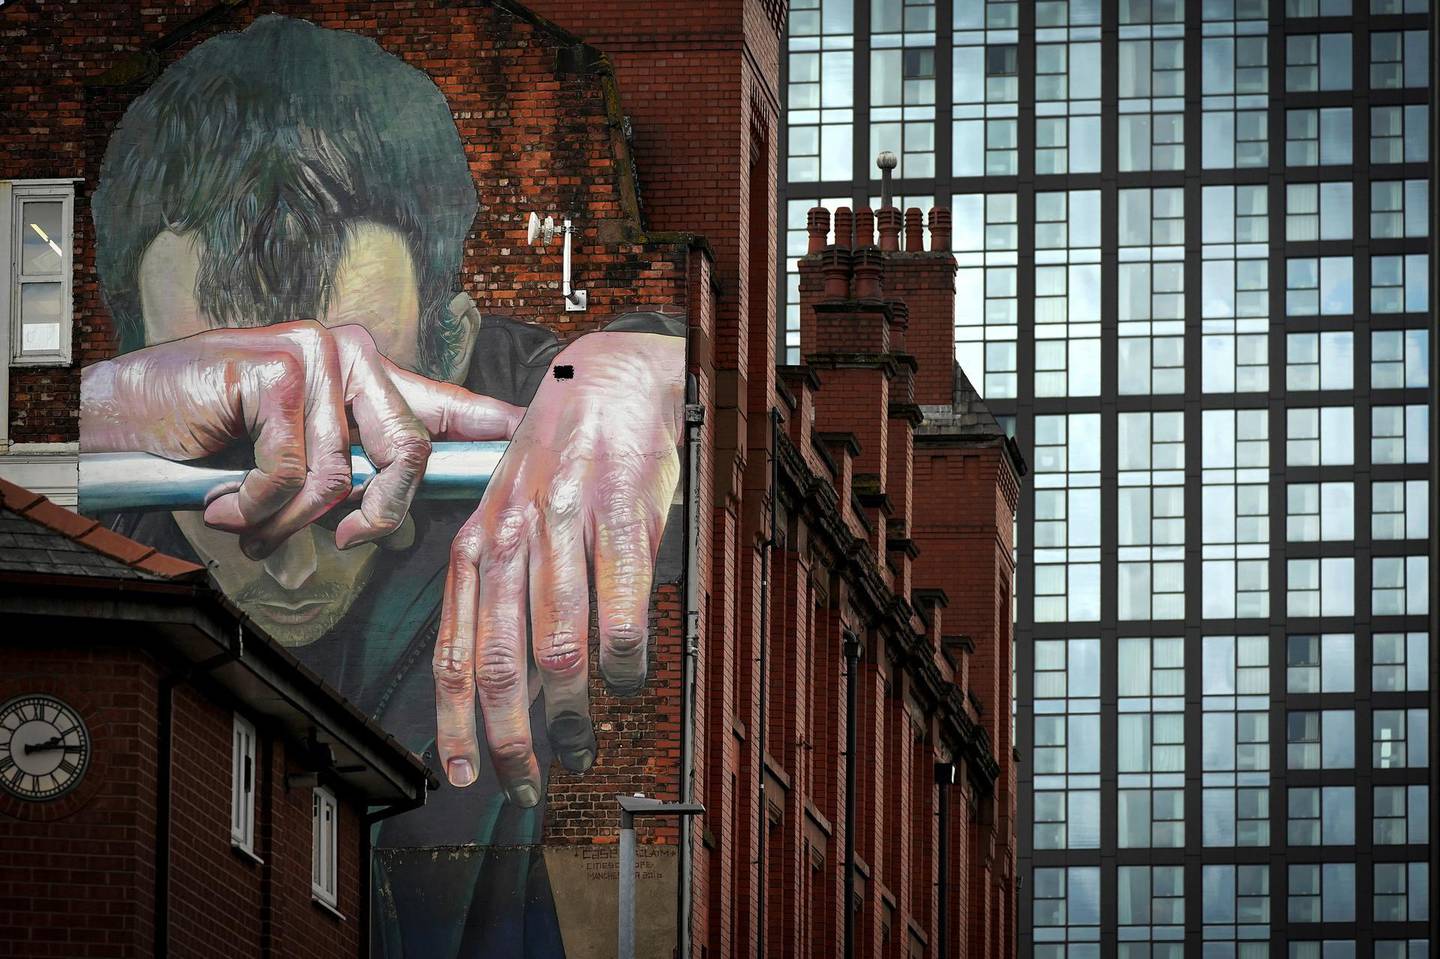 MANCHESTER, ENGLAND - OCTOBER 15: A mural by german artist Case depicts mental health issues on a wall in the city centre on October 15, 2020 in Manchester, England. Manchester was placed in the second of three alert levels this week when the British government introduced a new system for assessing covid-19 risk. However, the Manchester area fears it may be moved into tier 3 "High Alert as it has reported some of the highest numbers of new cases per 100,000 residents. (Photo by Christopher Furlong/Getty Images)